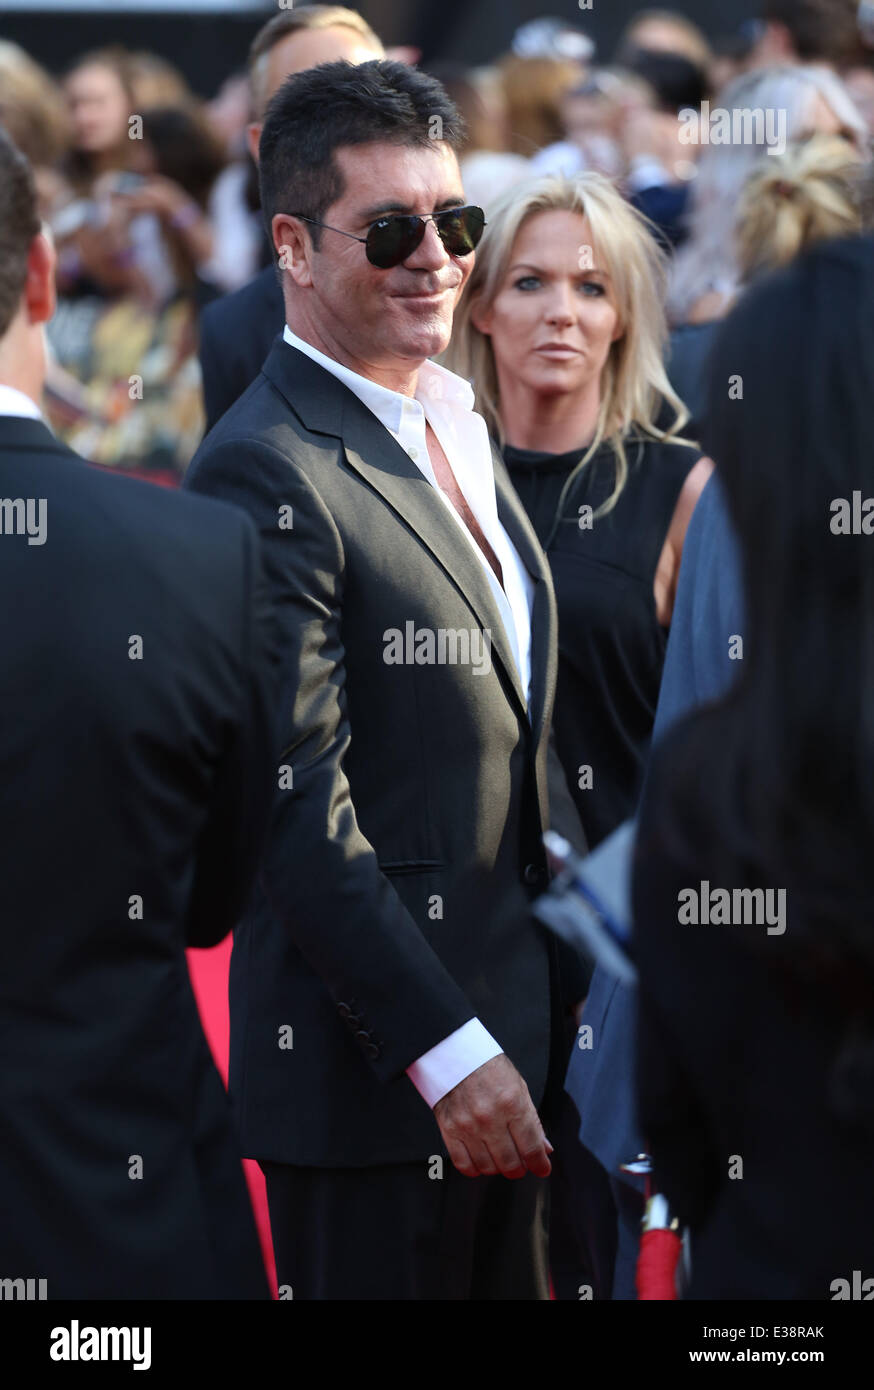 World premiere of 'One Direction: This Is Us' - Arrivals  Featuring: Simon Cowell Where: London, United Kingdom When: 20 Aug 201 Stock Photo